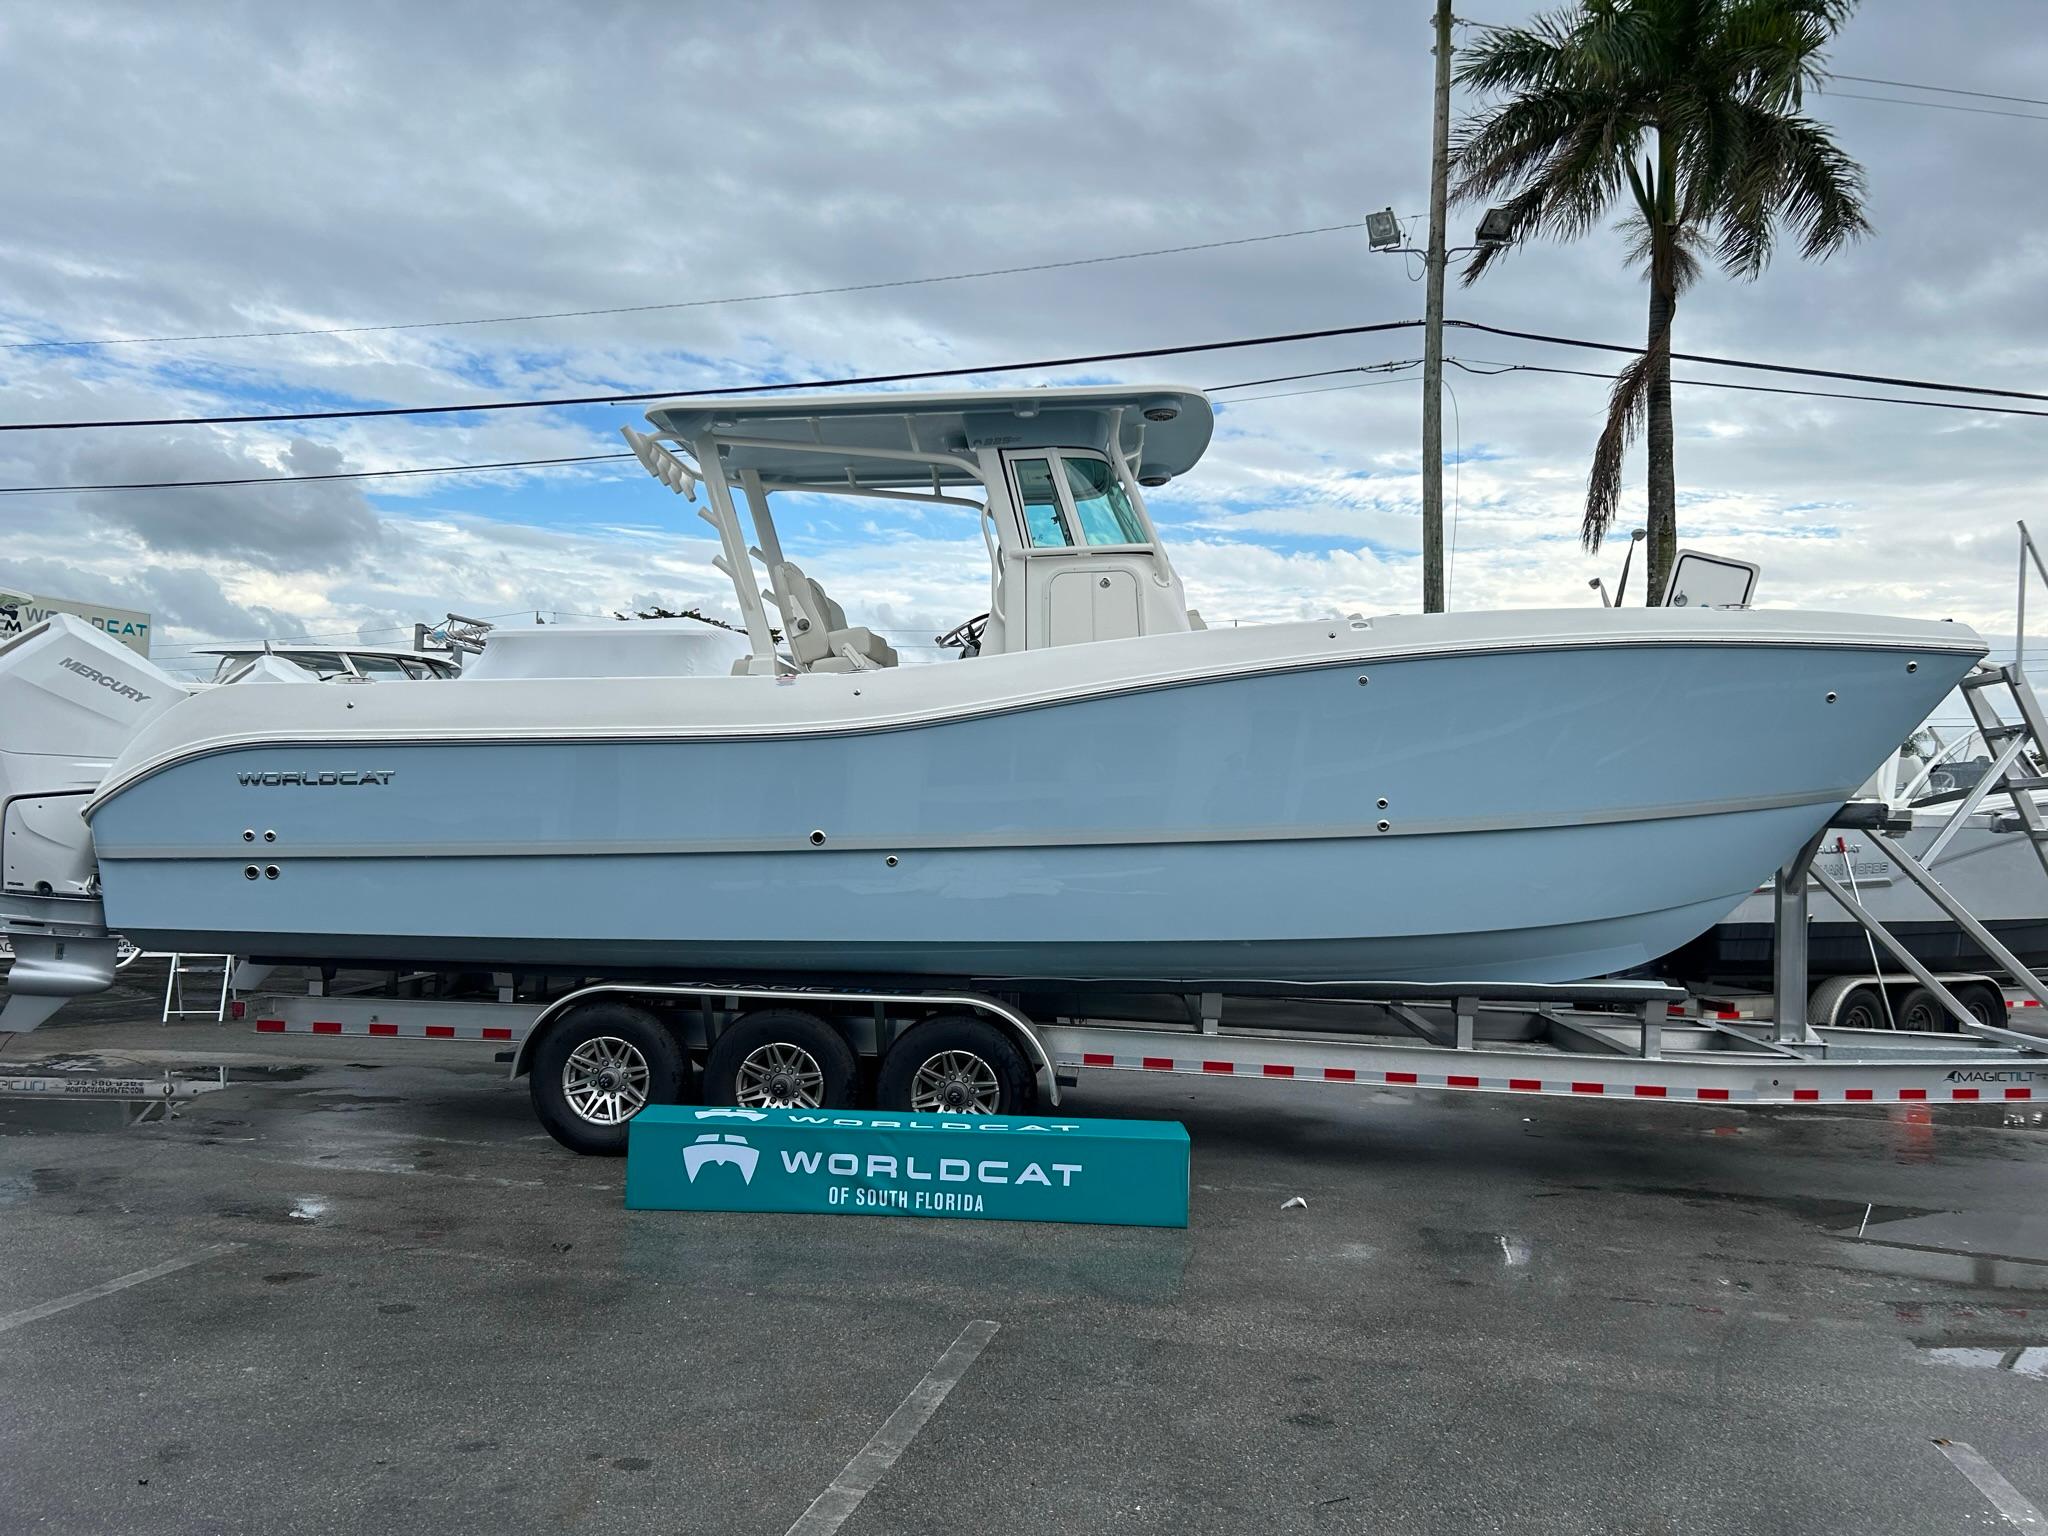 World Cat Center Console Boats for sale - Rightboat